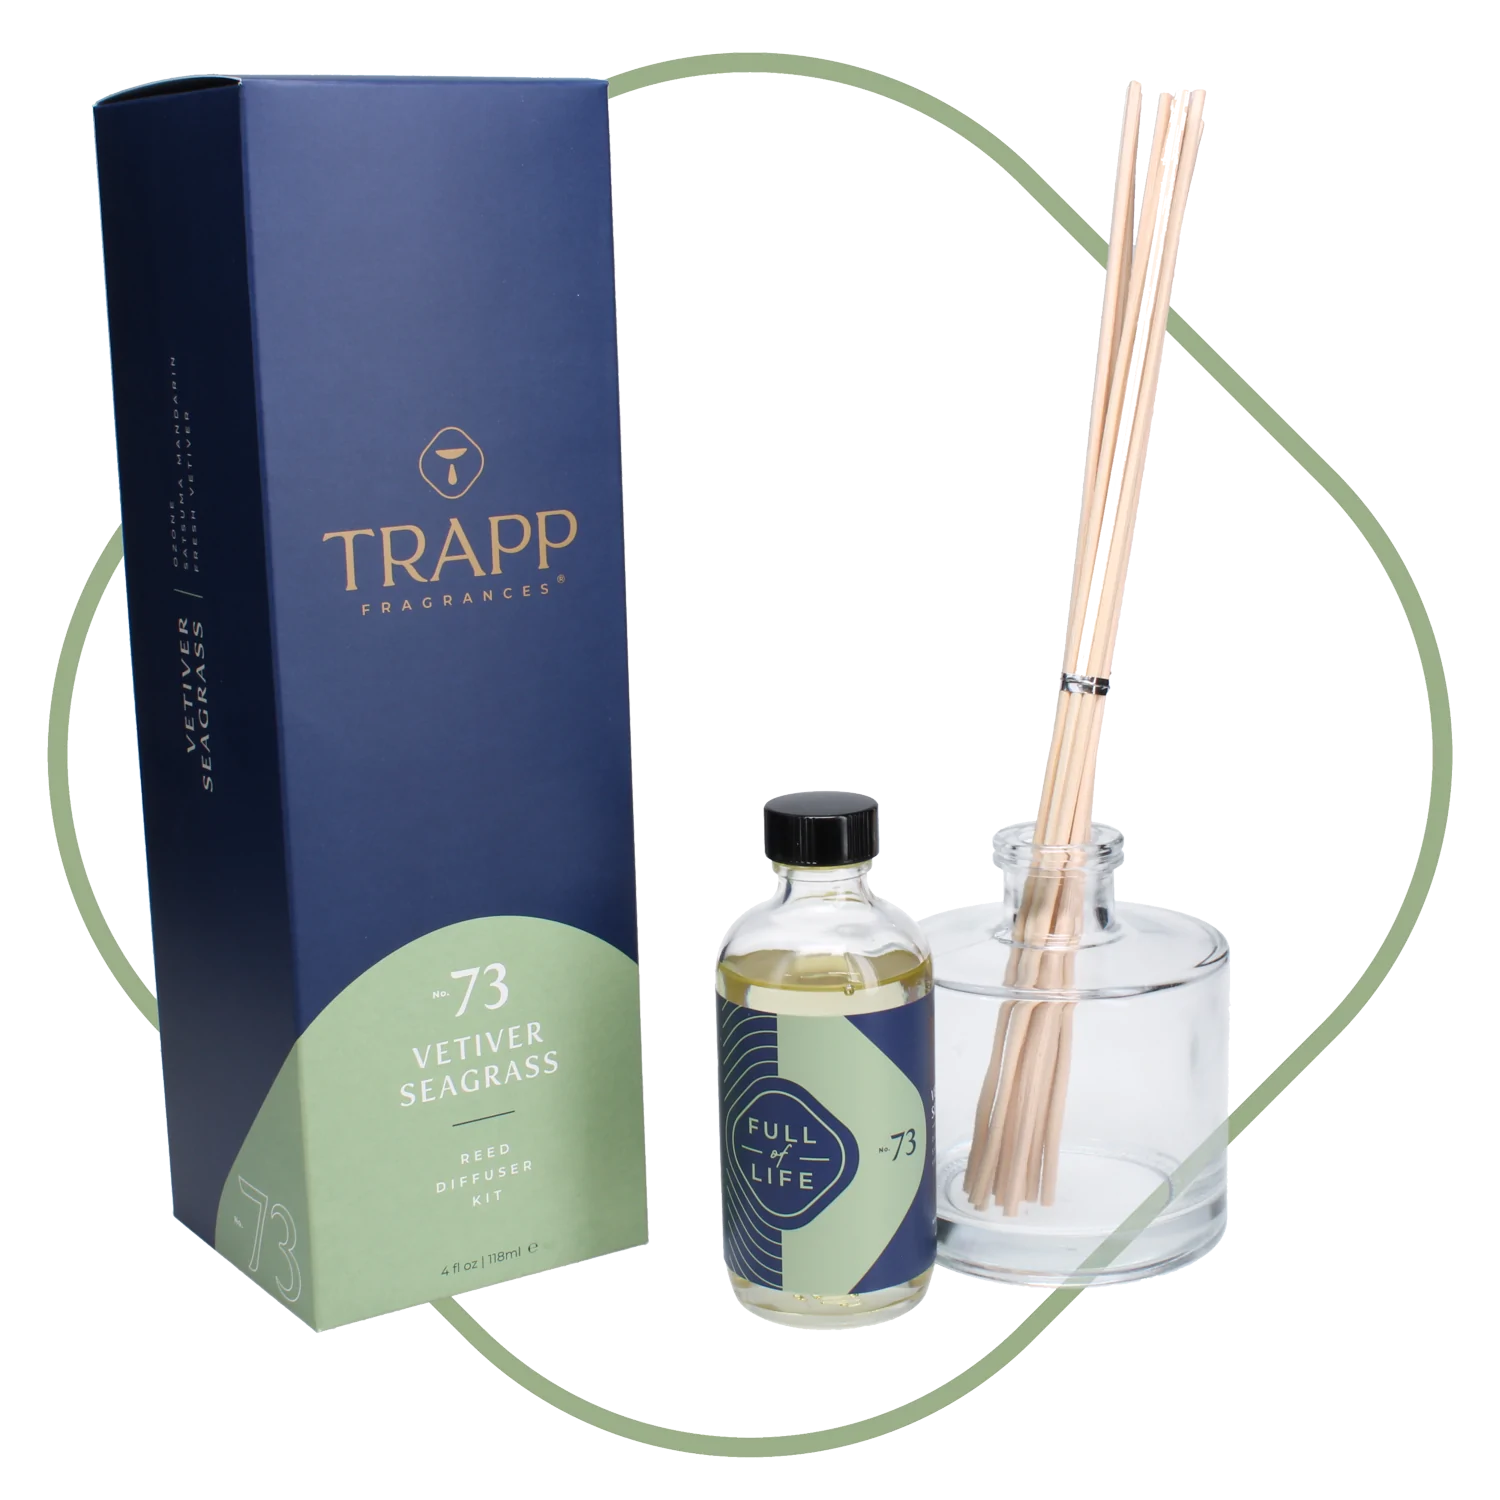 No. 73 Vetiver Seagrass 4 oz. Reed Diffuser Kit